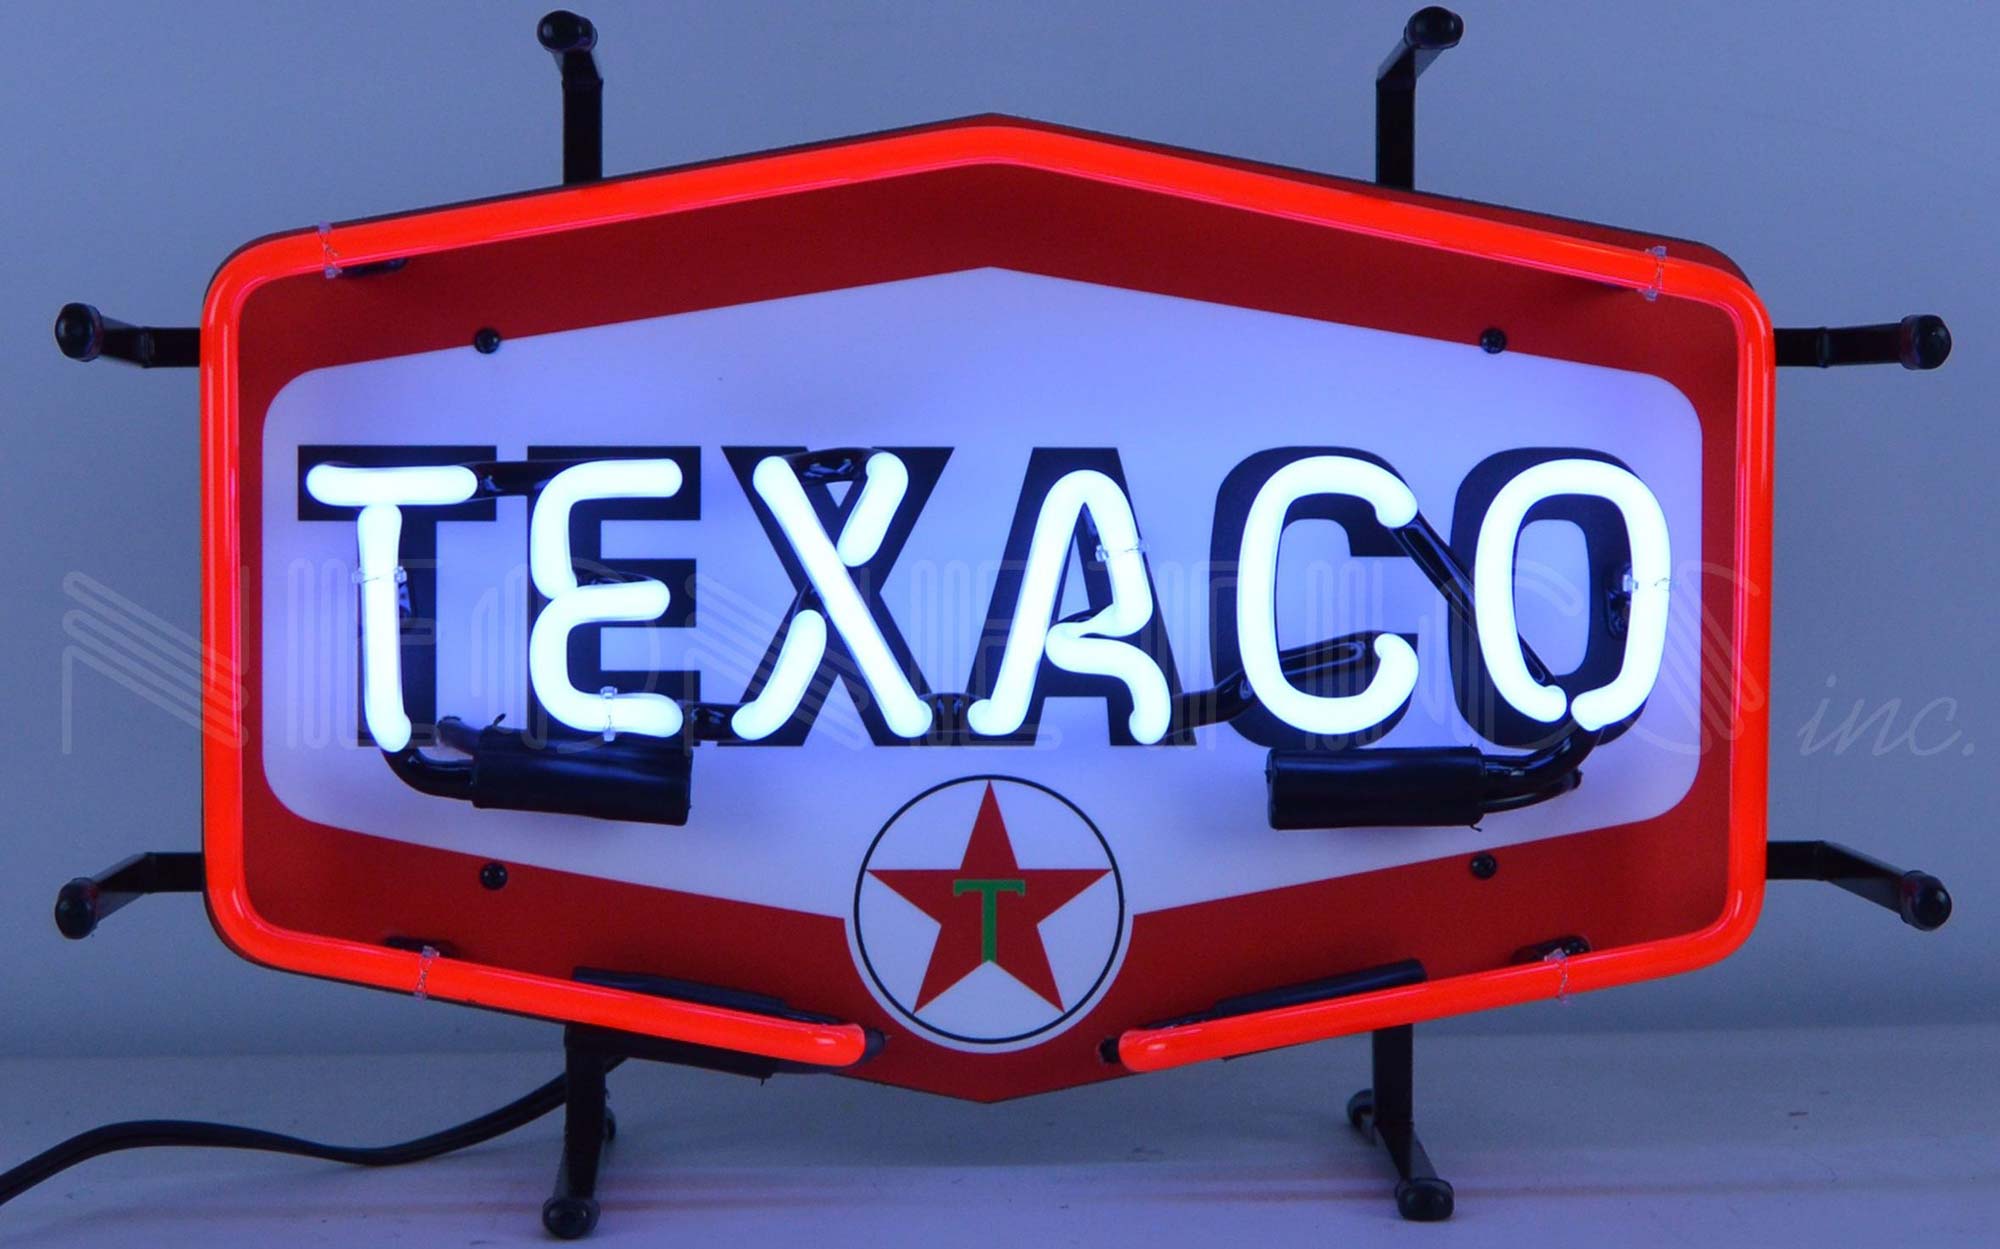 A Neon Sign from the Gas & Oil brand Texaco; Marketing Signs- A Timeless Emblem Of American Automotive History Texaco Neon Sign